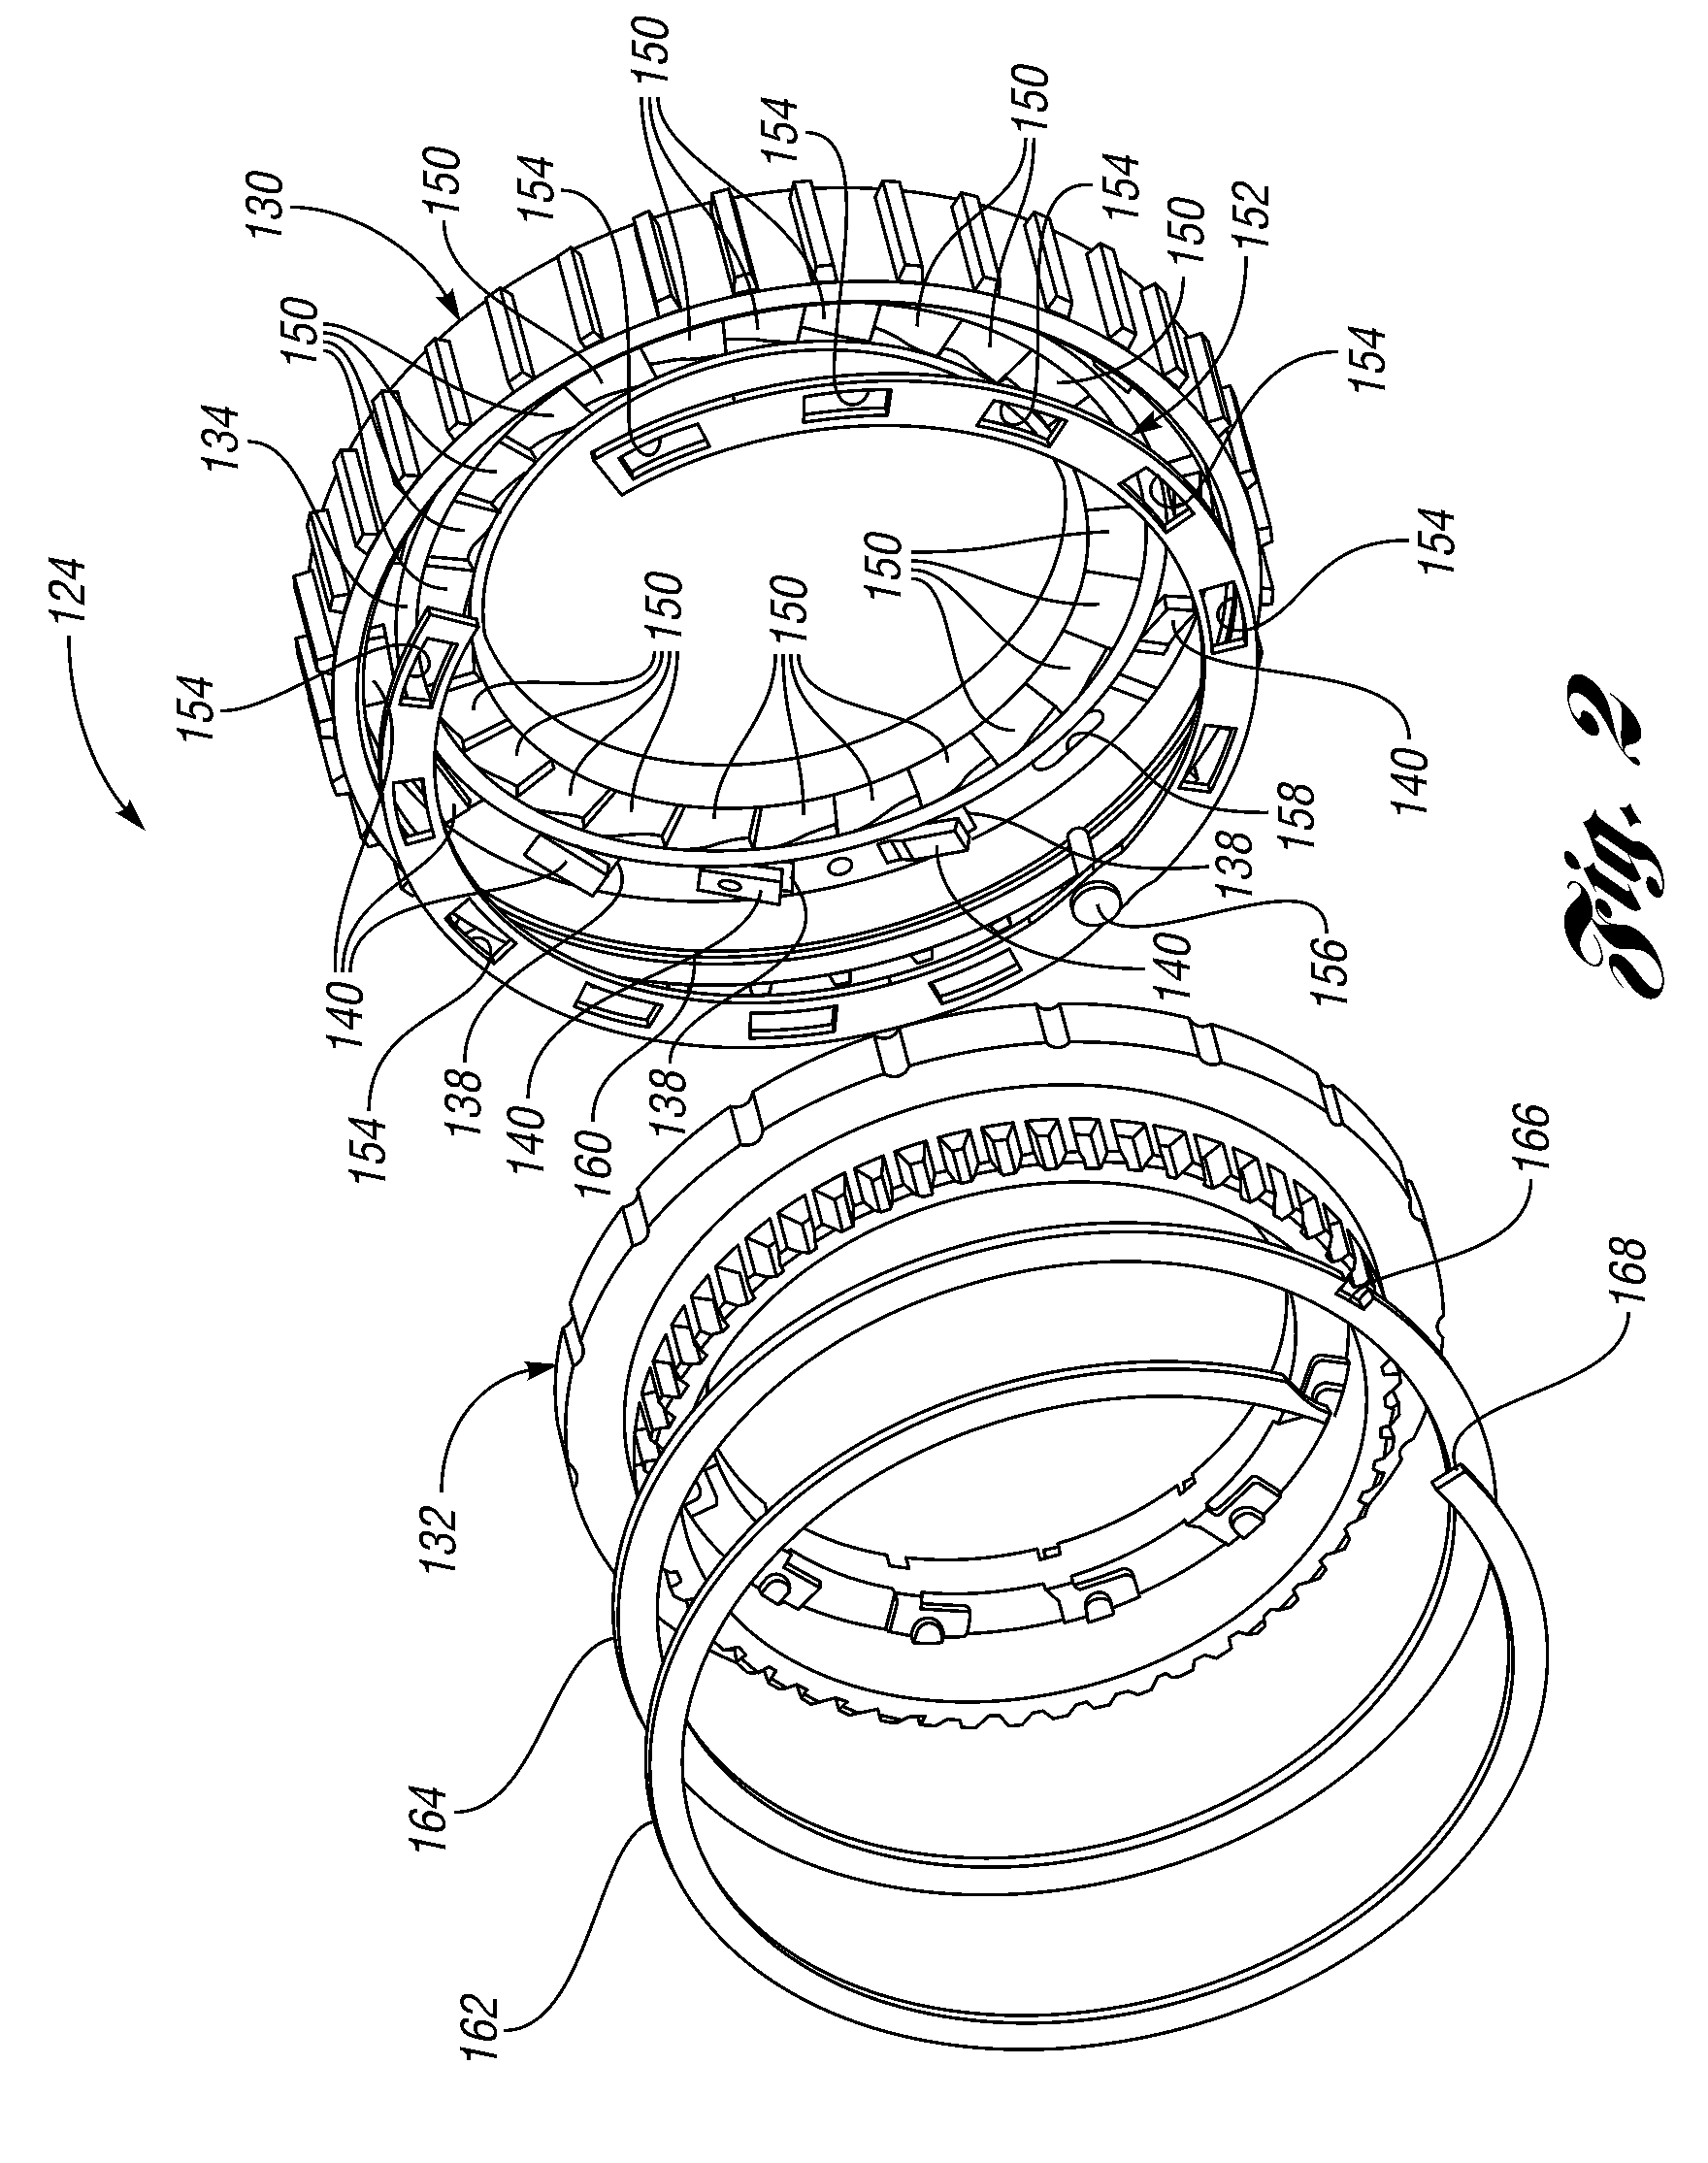 Overrunning Coupling Assembly